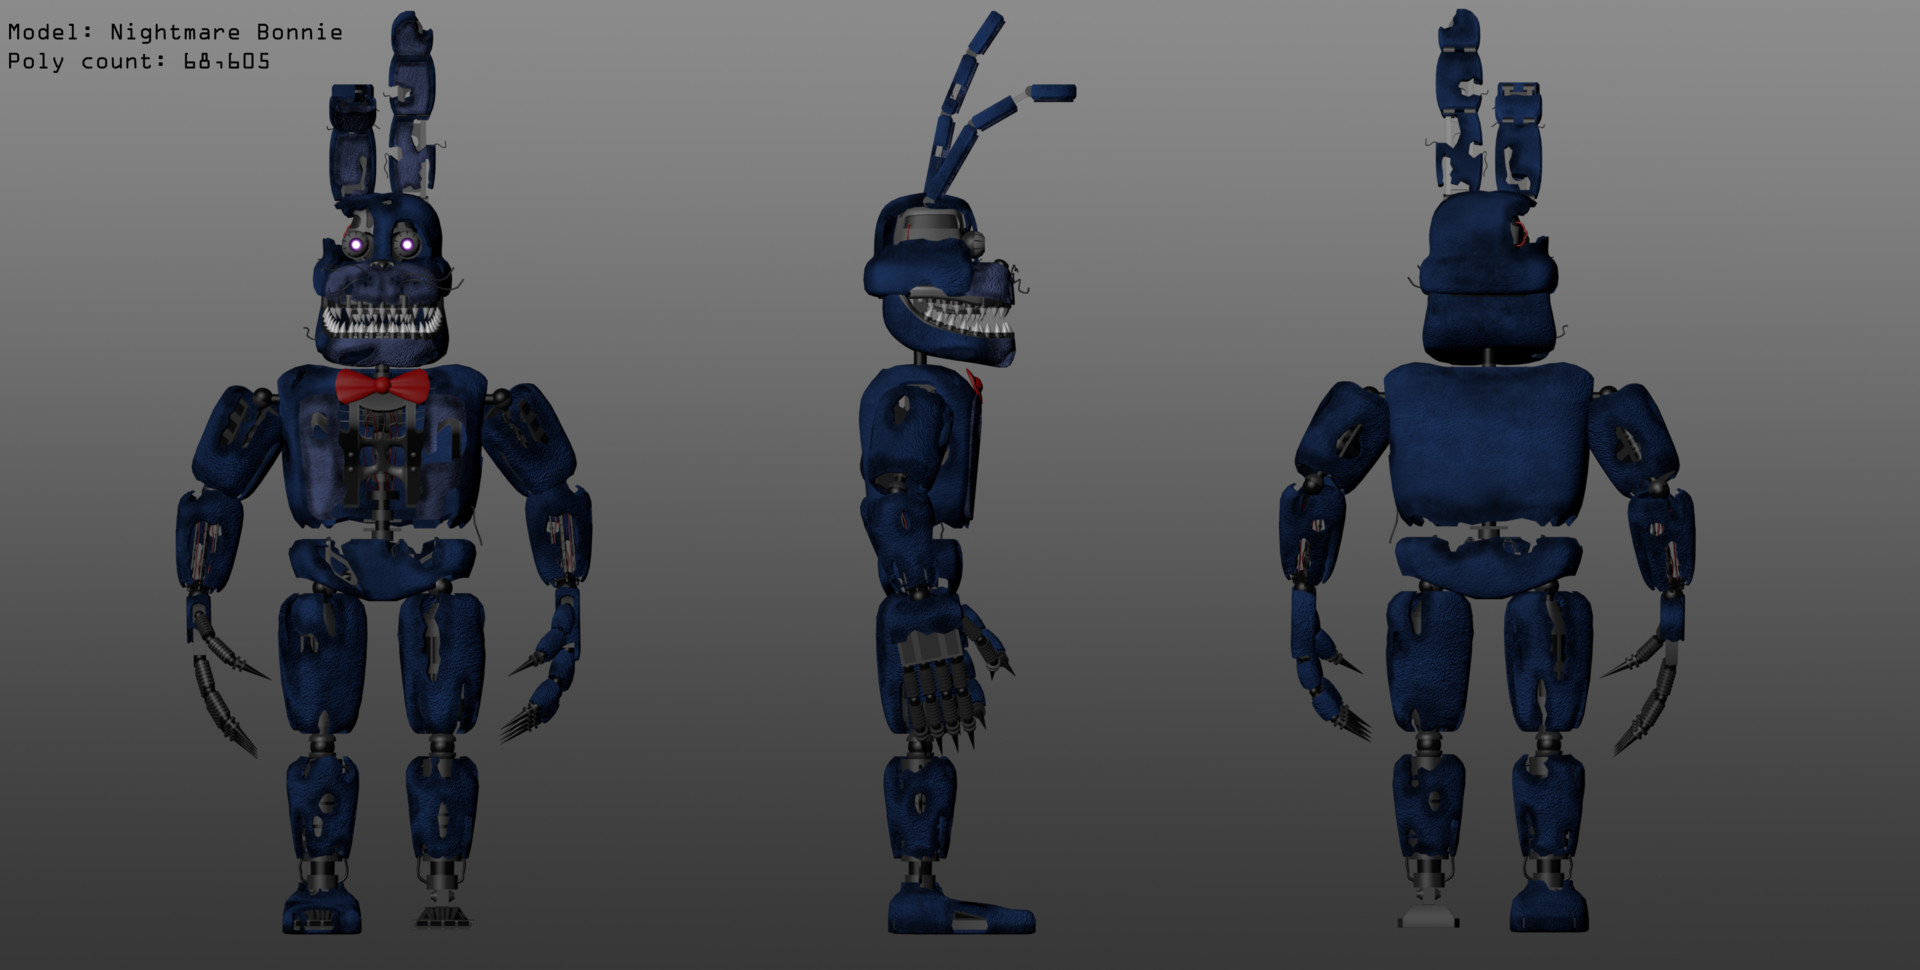 Five Nights at Freddy's 4 Fan-Made Nightmare 3D Models by Thomas Honeybell